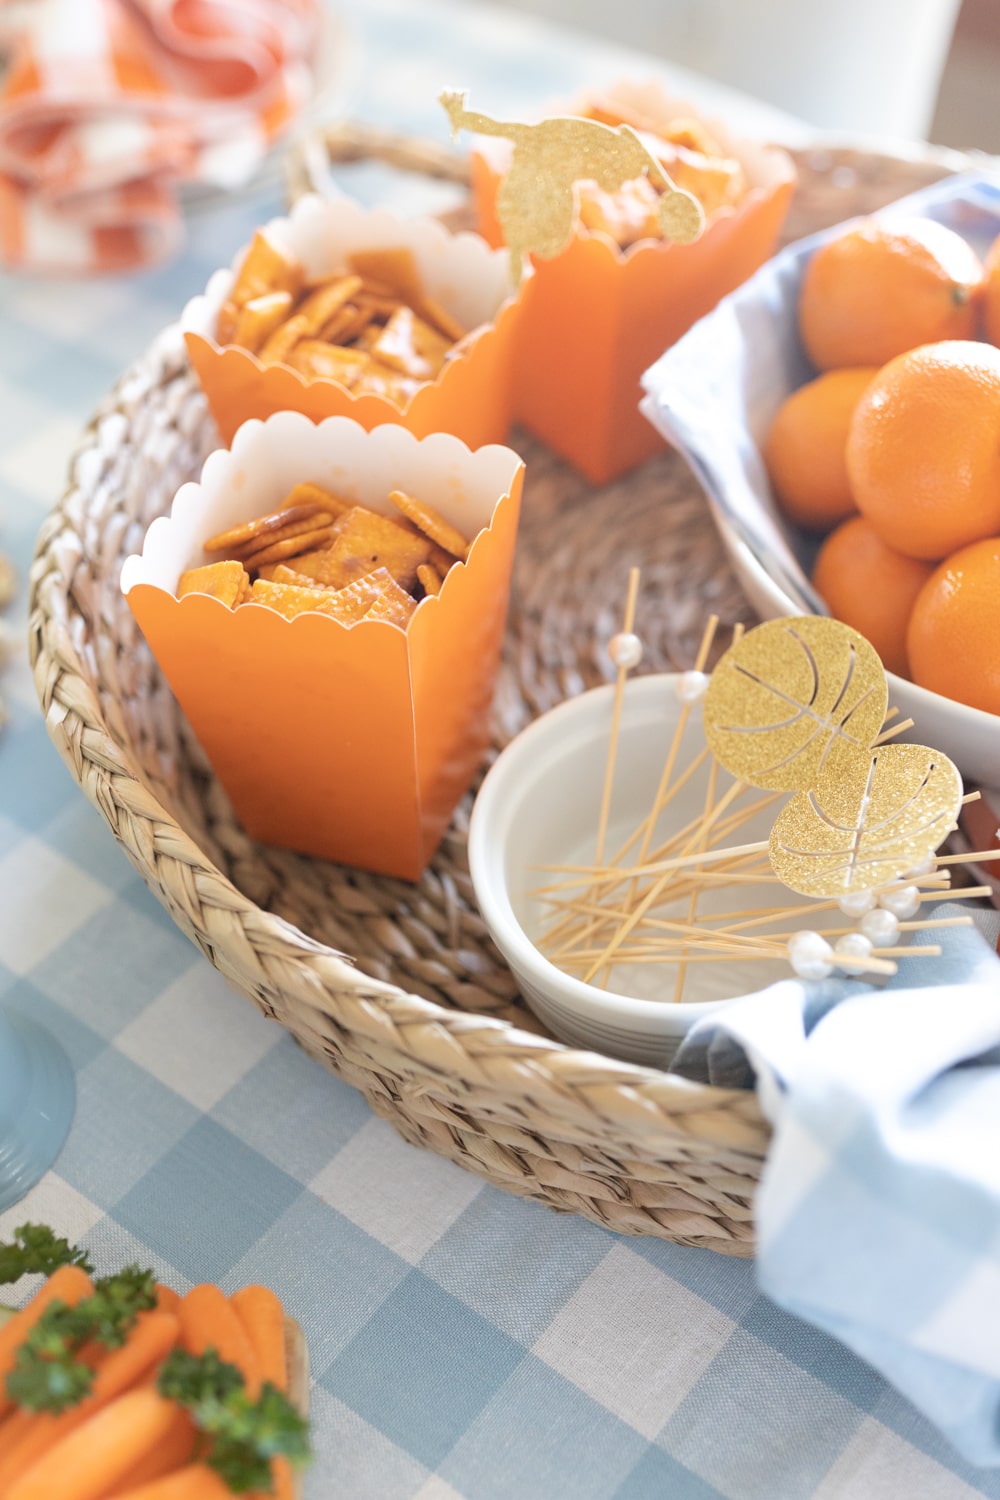 Orange snack ideas created by blogger Stephanie Ziajka for a March Madness party on Diary of a Debutante